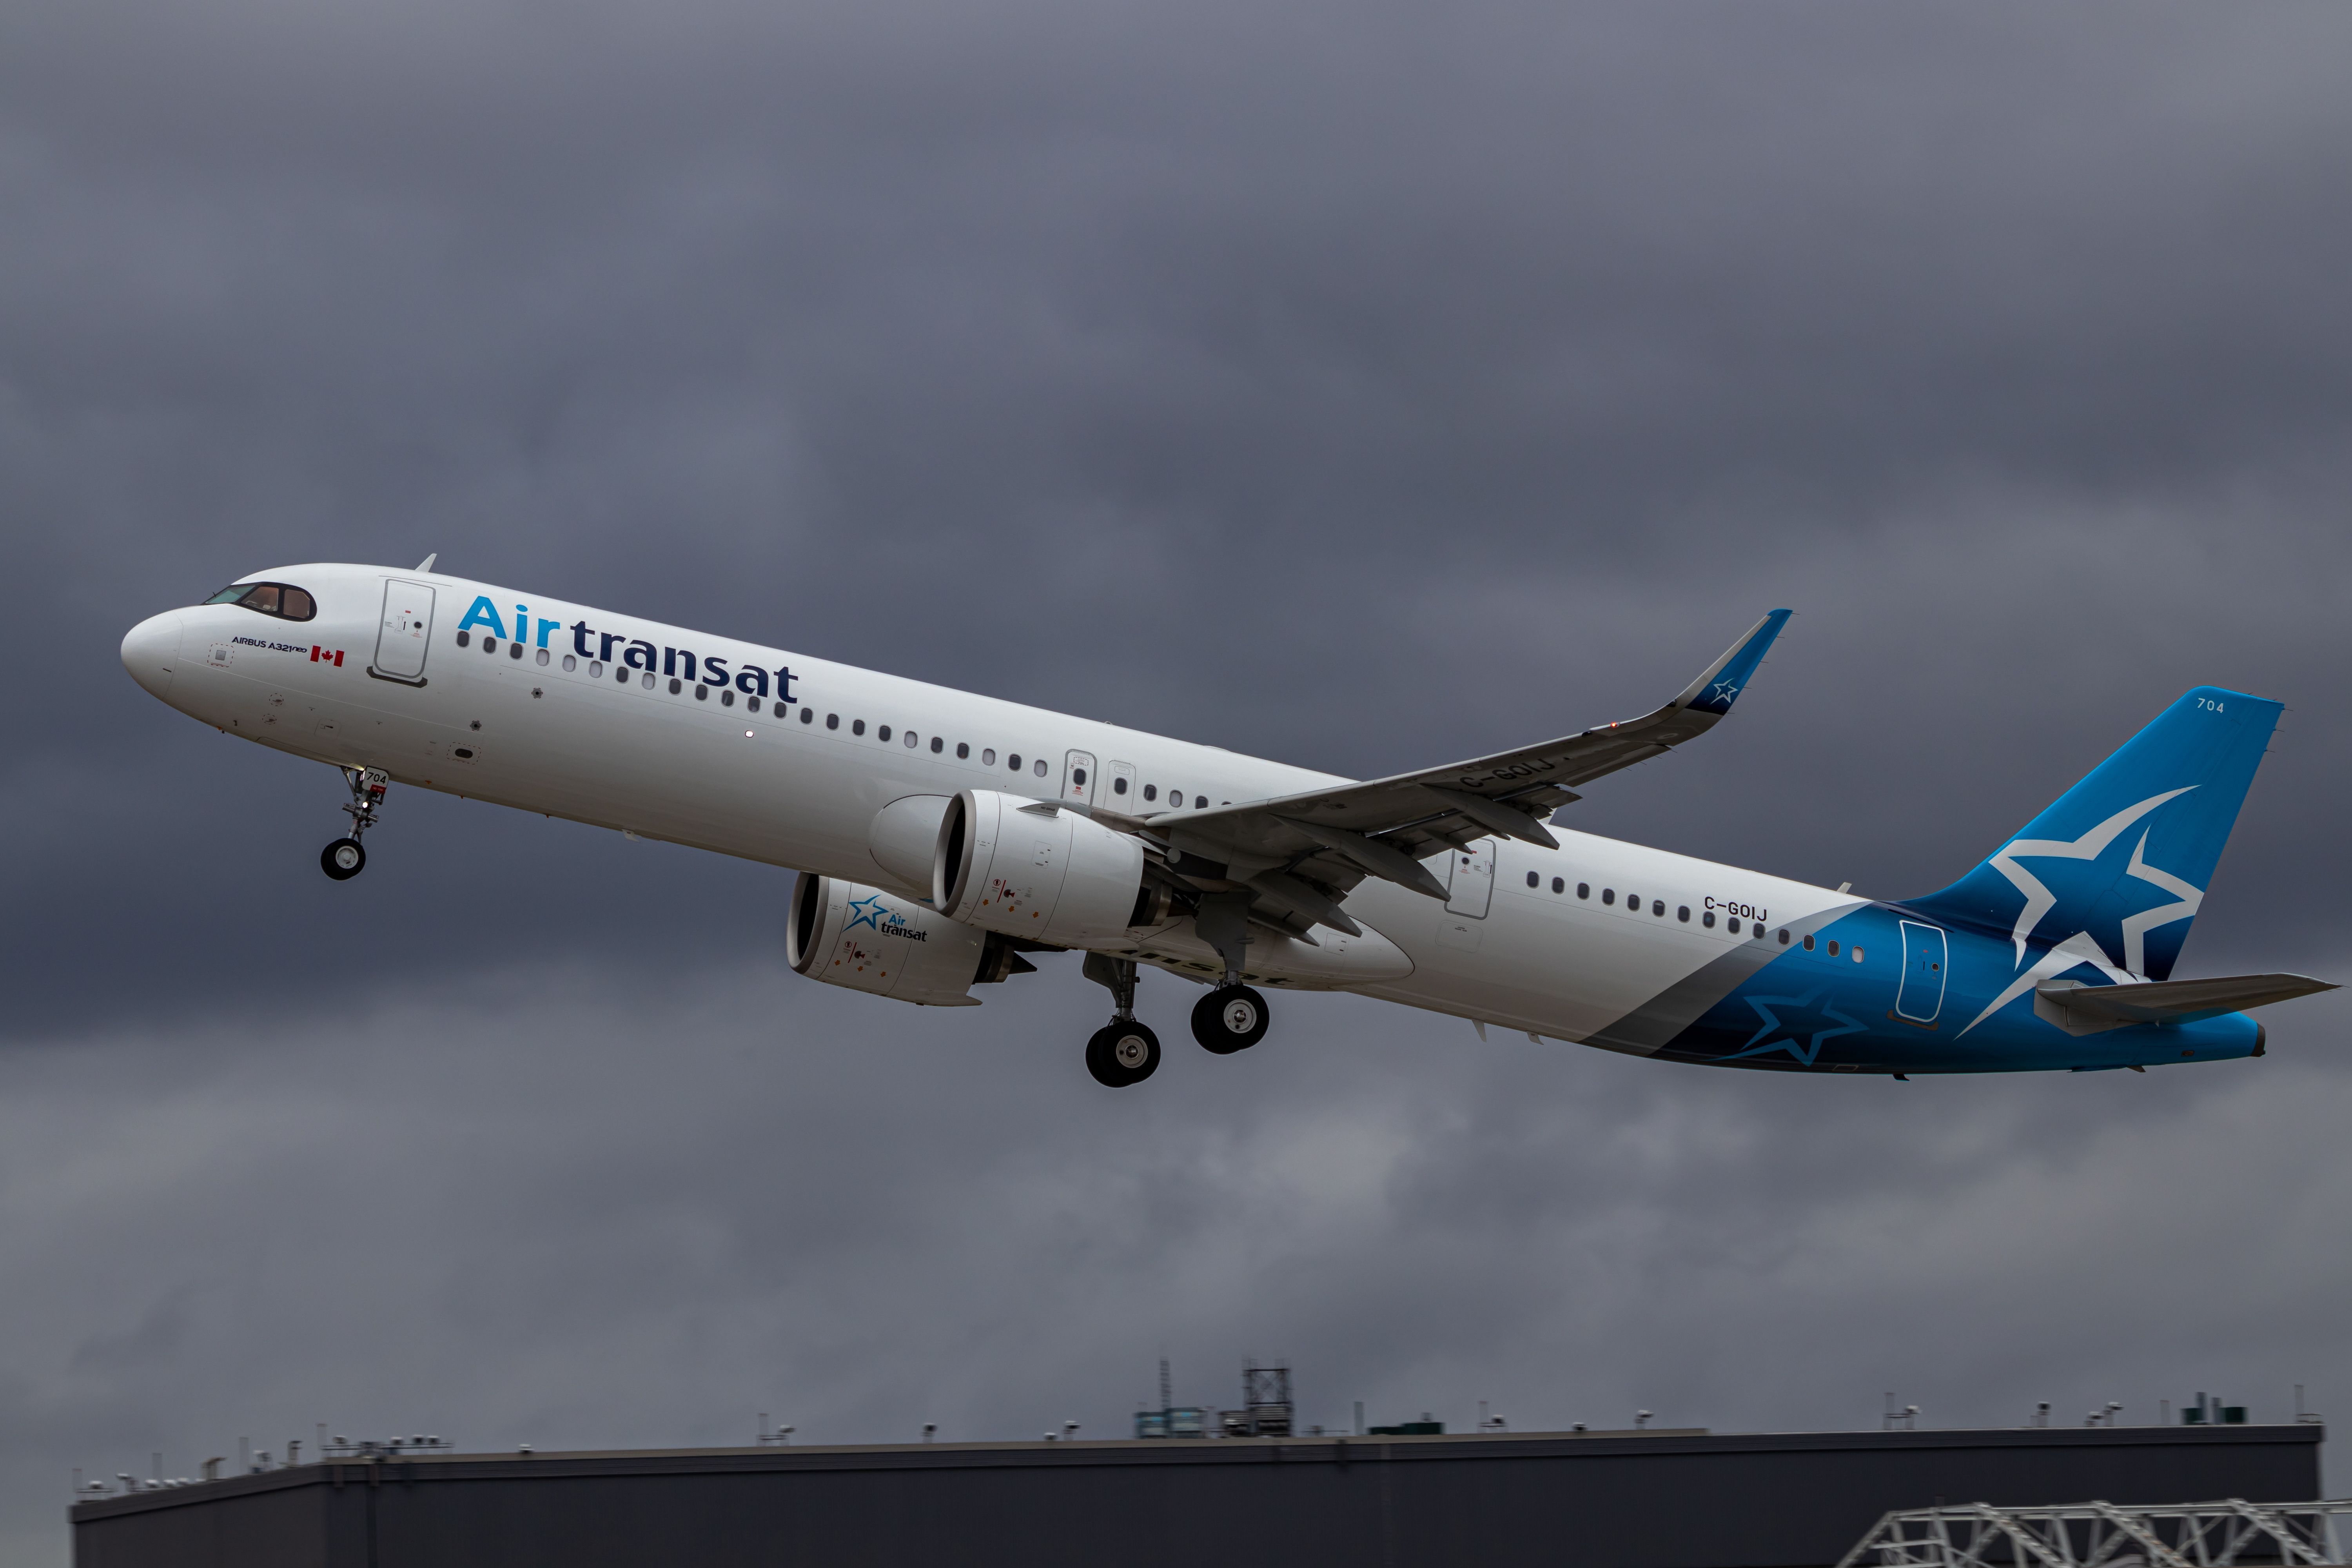 Air Transat Airbus A321LR taking off from Montreal, Canada